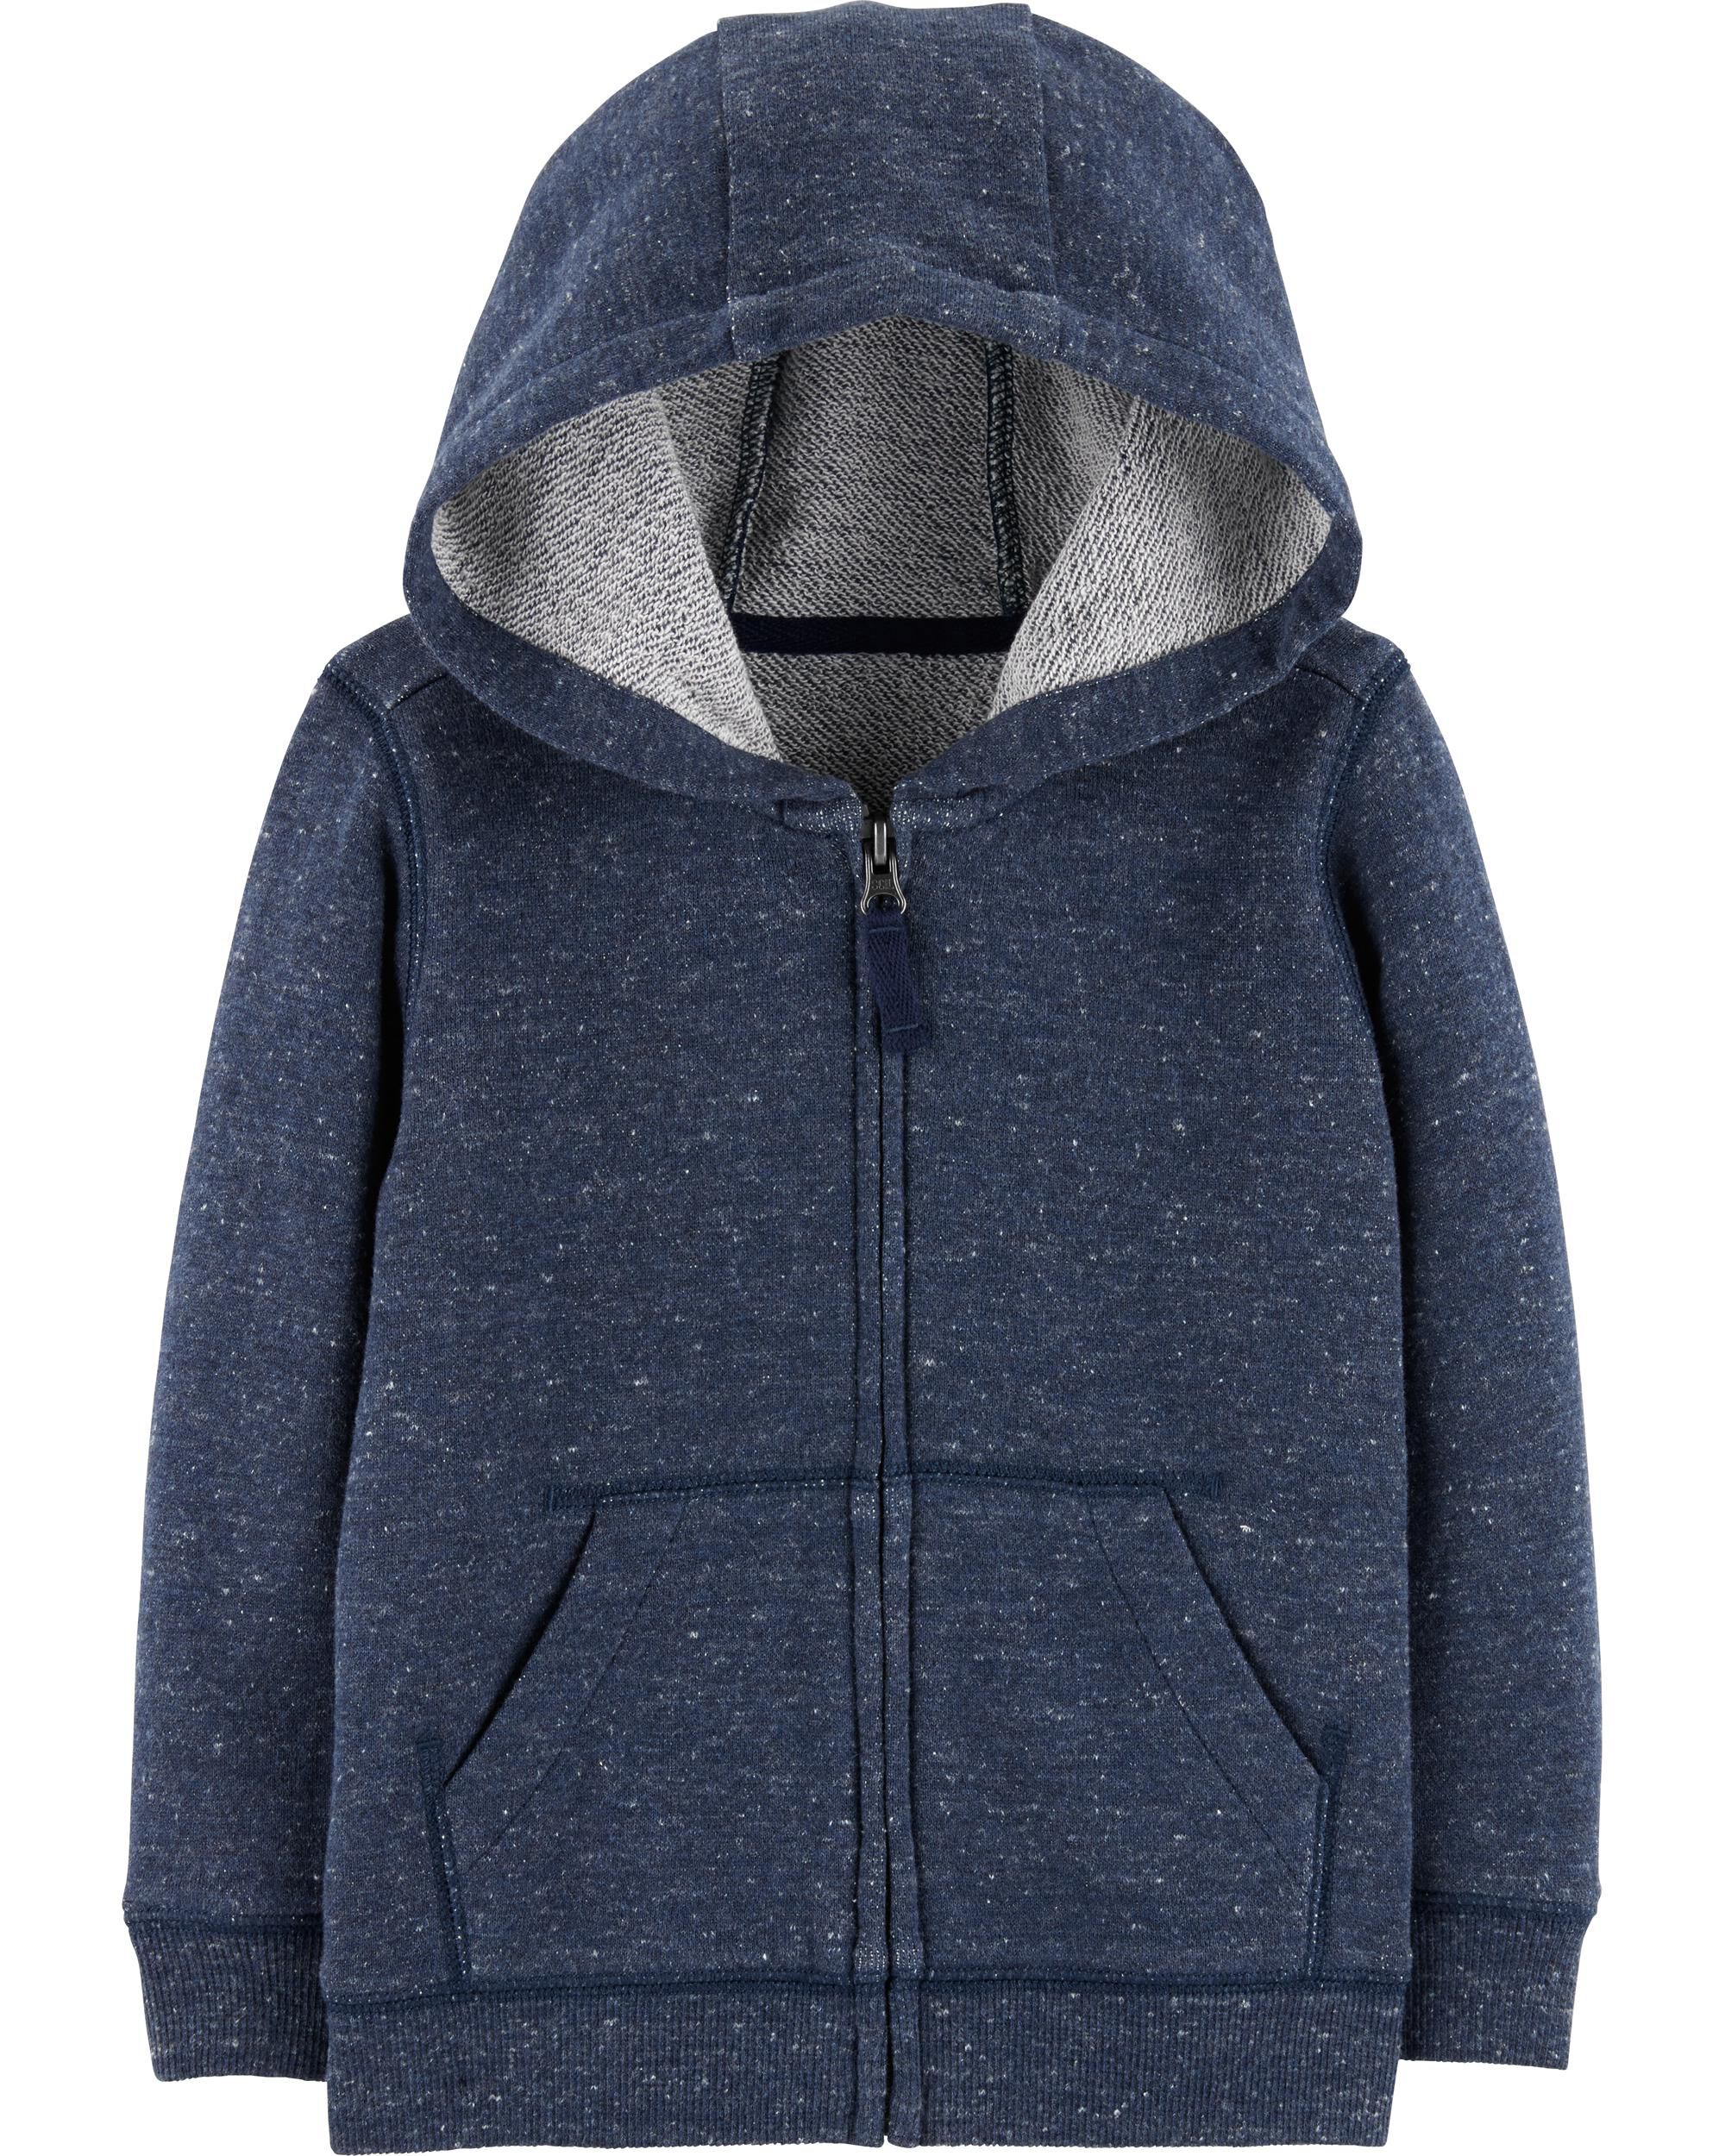 Details about   NWT Baby Boy Toddlers Carter's Size 18 & 24 Months Midweight Hooded Jacket $50 